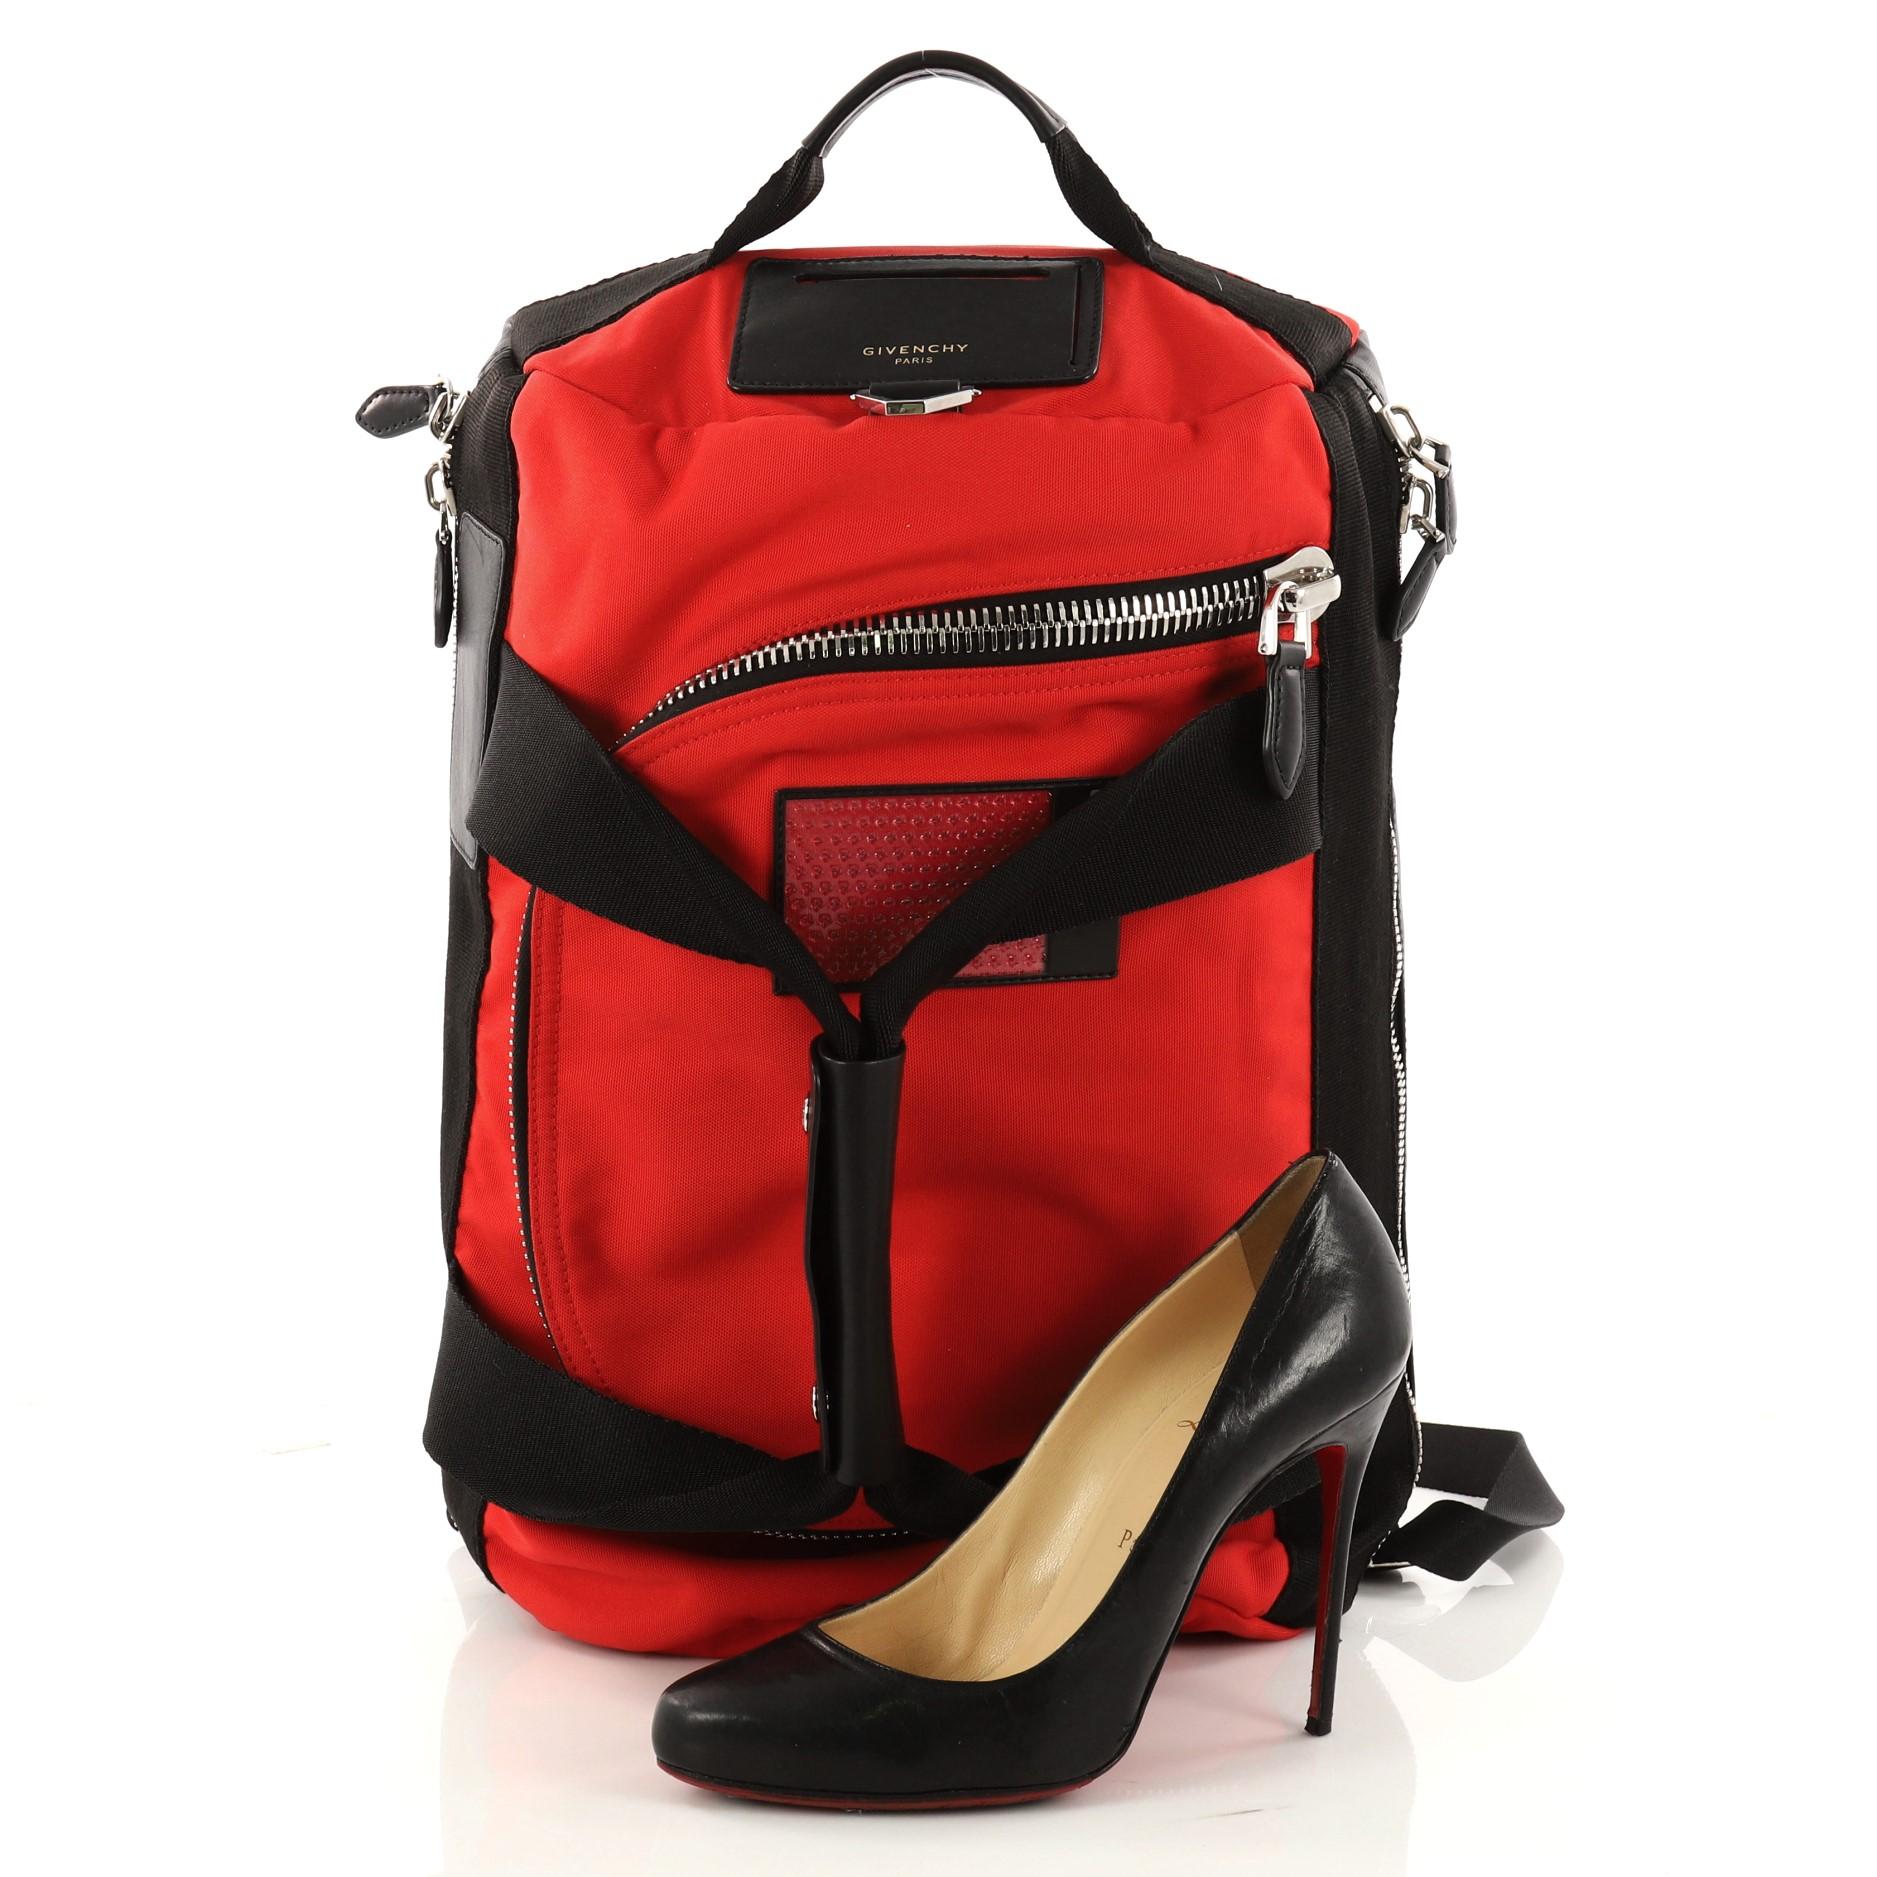 This authentic Givenchy Convertible Duffle Backpack Nylon and Leather is the ideal bag for everyday utility. Crafted in red nylon and black leather, this cutting-edge backpack features top handles with snap keeper, carrying handle, adjustable back